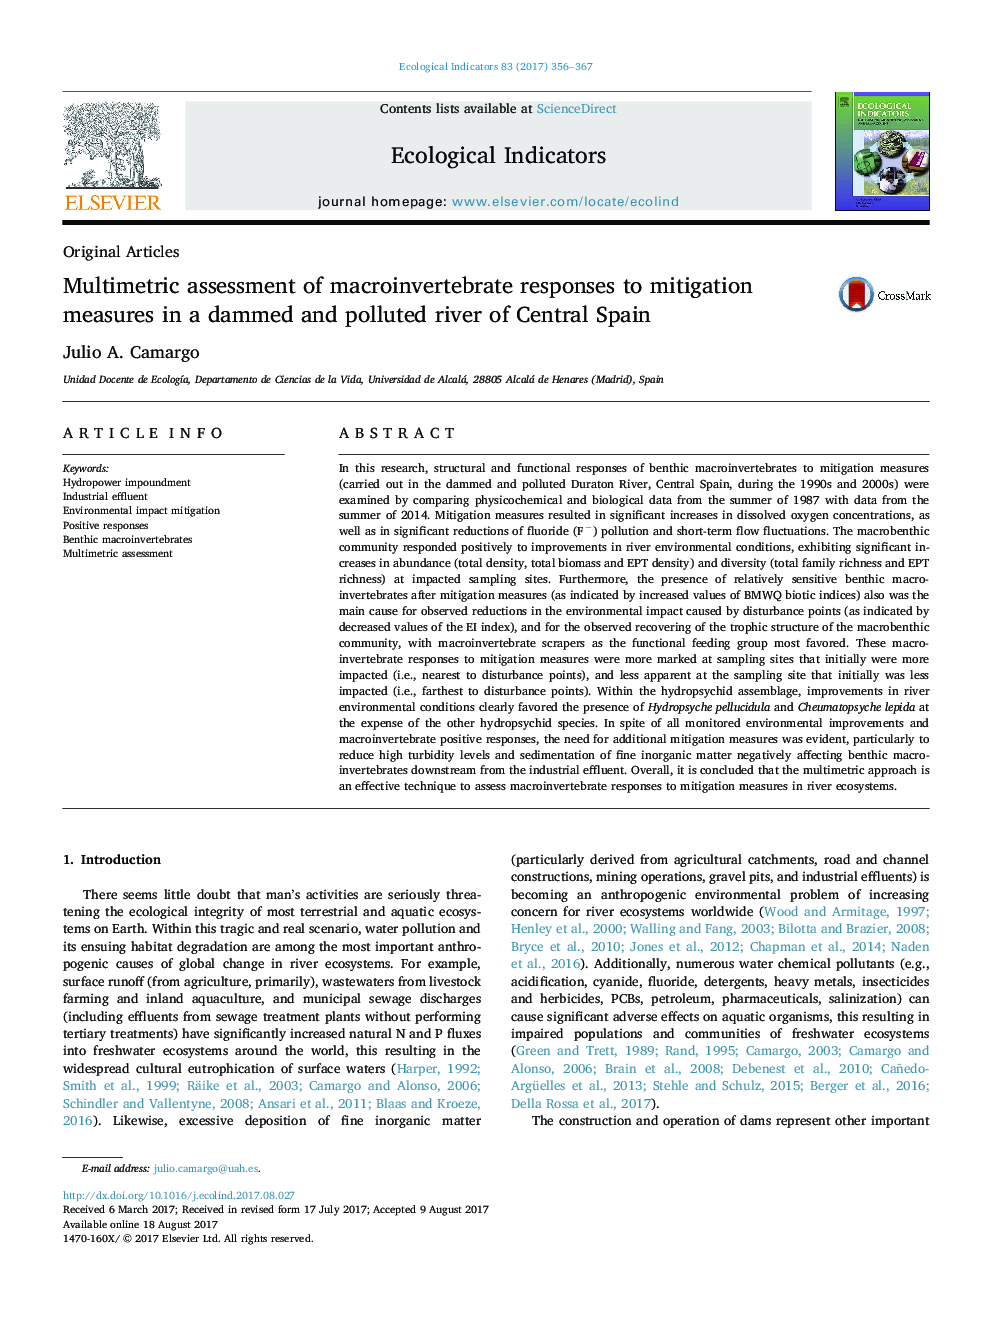 Original ArticlesMultimetric assessment of macroinvertebrate responses to mitigation measures in a dammed and polluted river of Central Spain